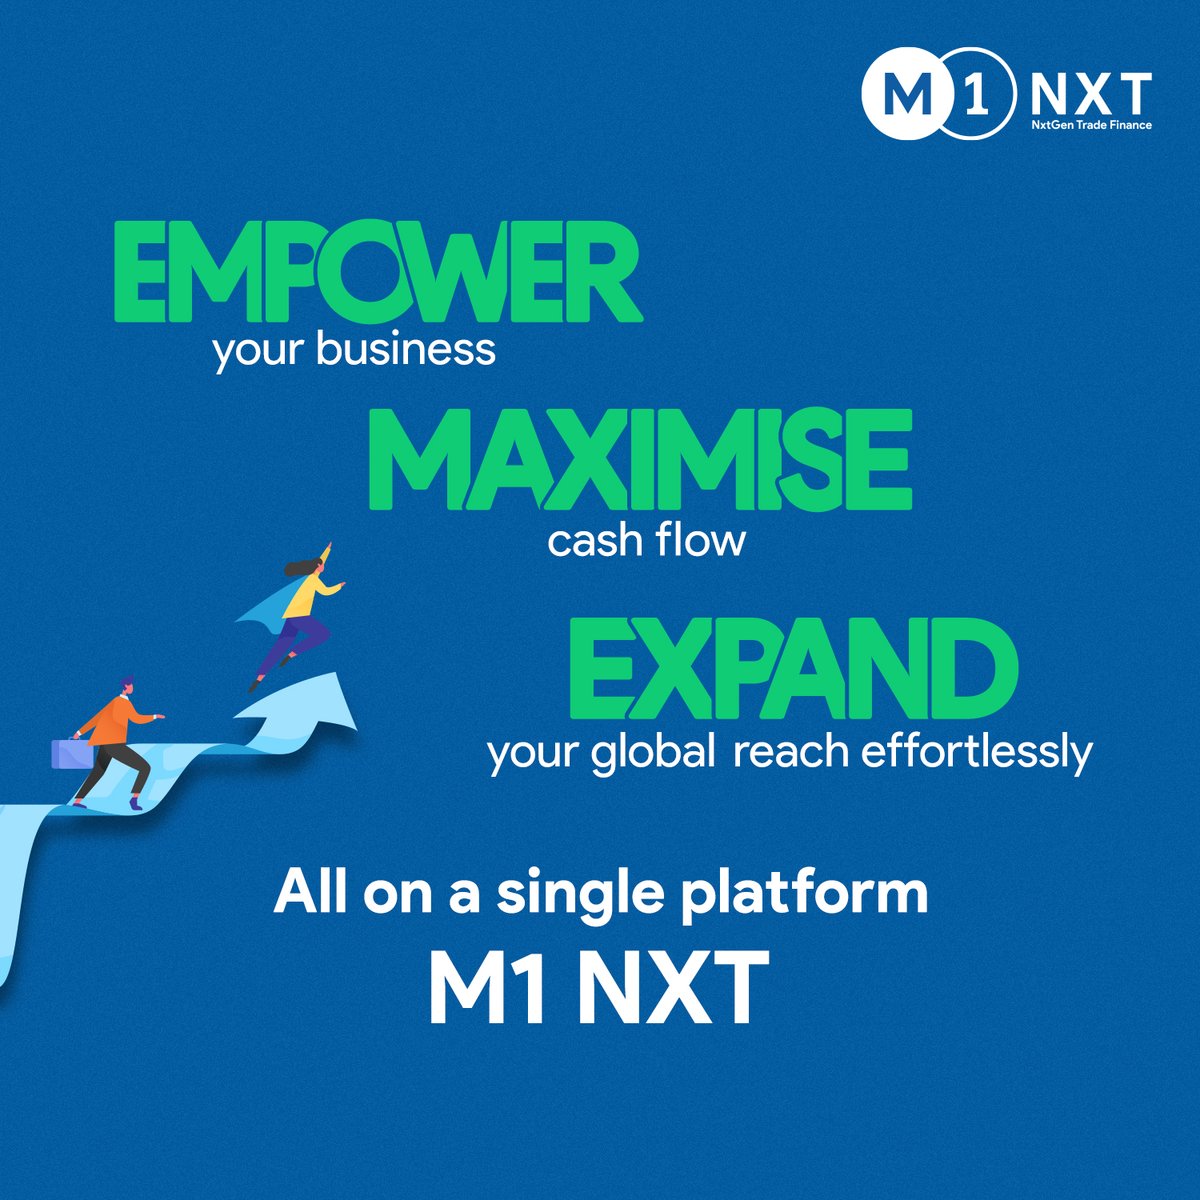 Grow fearlessly with #M1NXT, your all-in-one business growth solution. Onboard with us now. Visit m1nxt.com to know more.

#Factoring #CrossBorderFactoring #FinancialFreedom #Digital #Innovation #MSME #ImprovedCashFlow #EmpowerYourBusiness